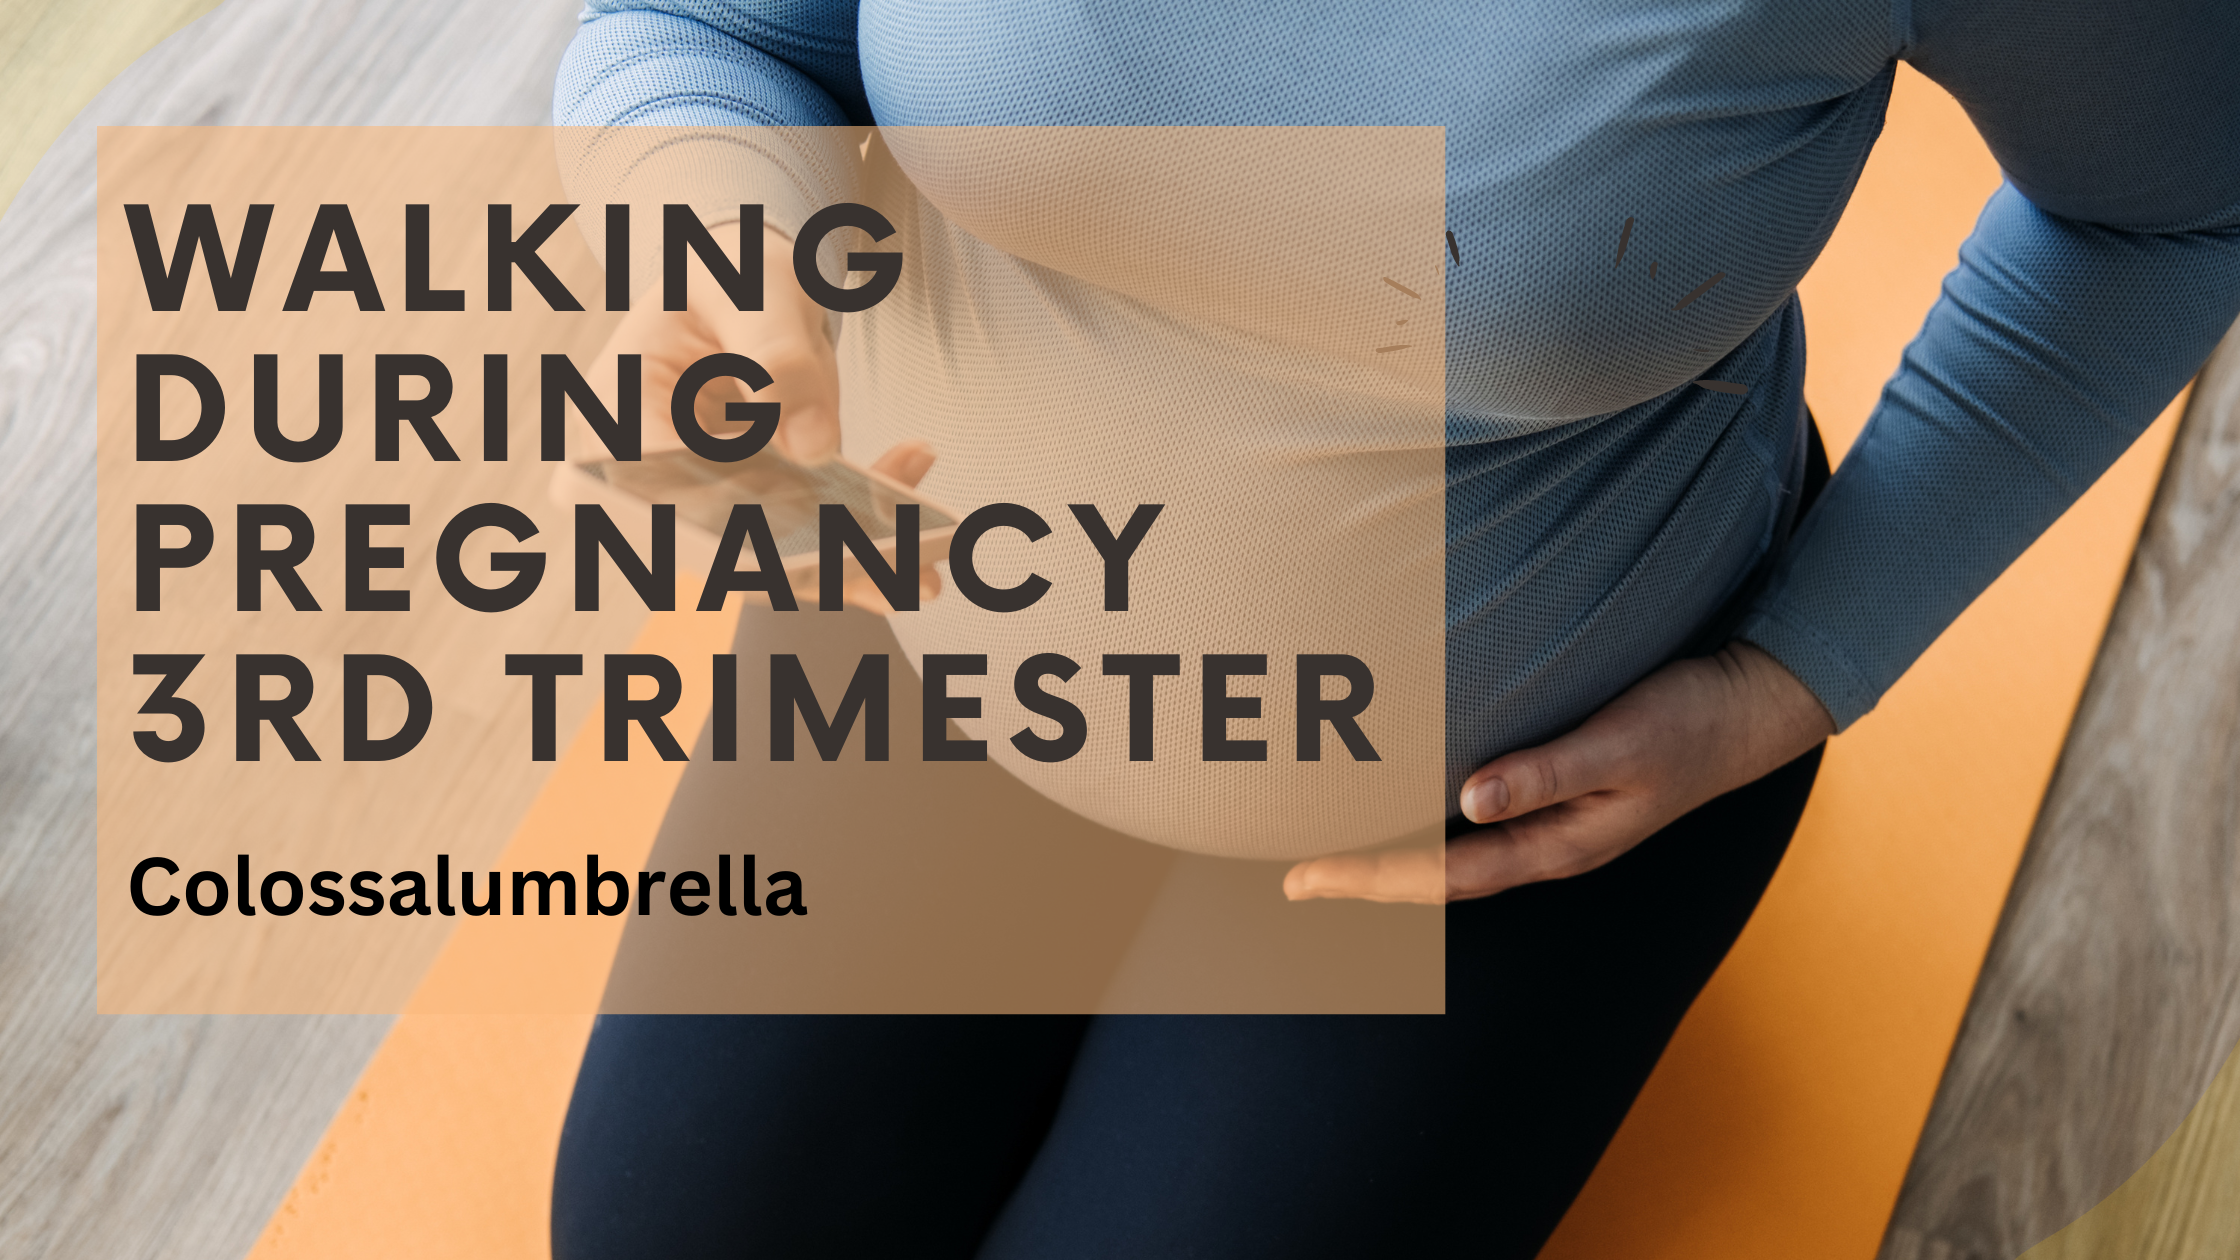 Benefits of walking during pregnancy 3rd trimester